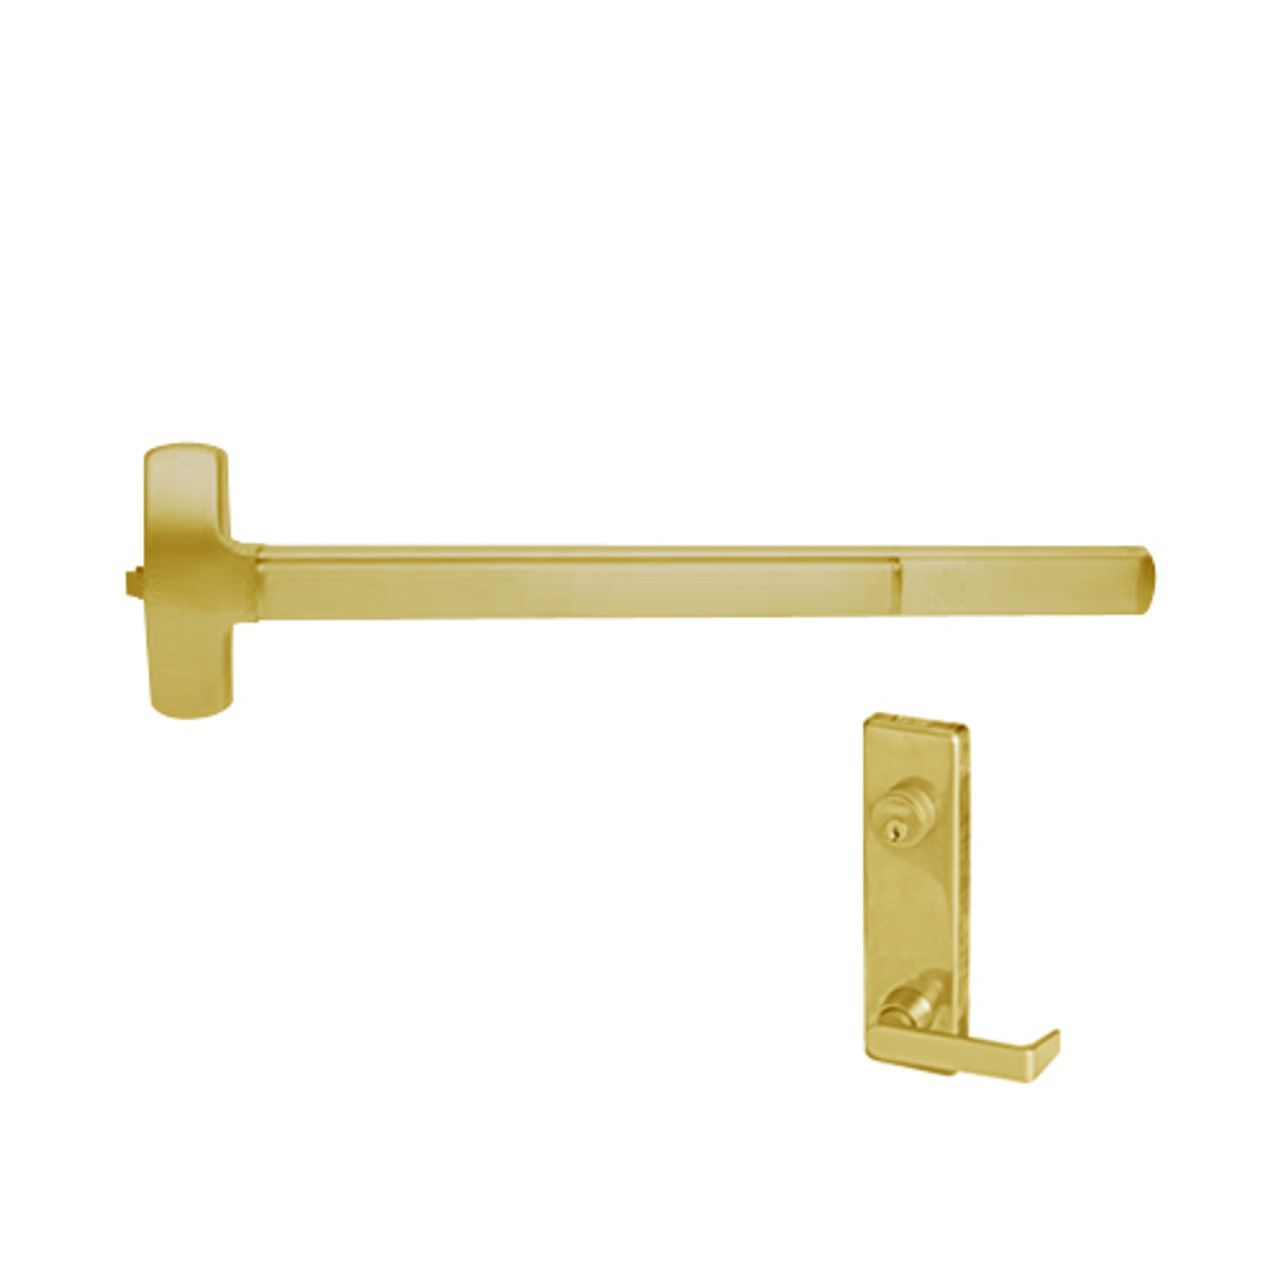 F-25-R-L-NL-DANE-US3-4-LHR Falcon Exit Device in Polished Brass